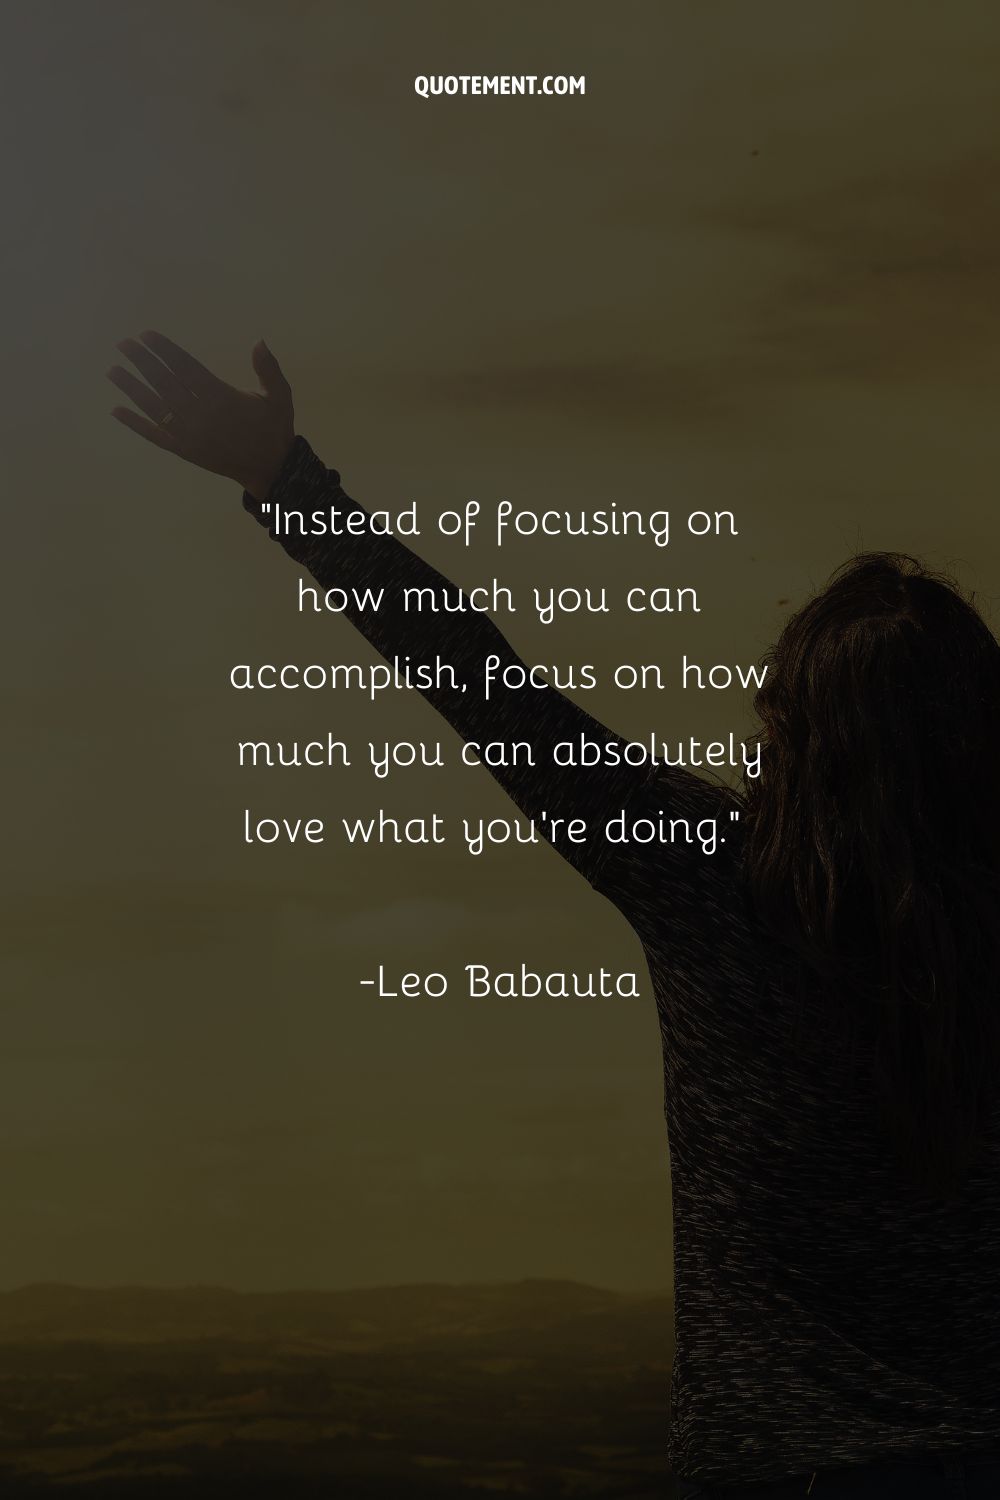 Instead of focusing on how much you can accomplish, focus on how much you can absolutely love what you’re doing